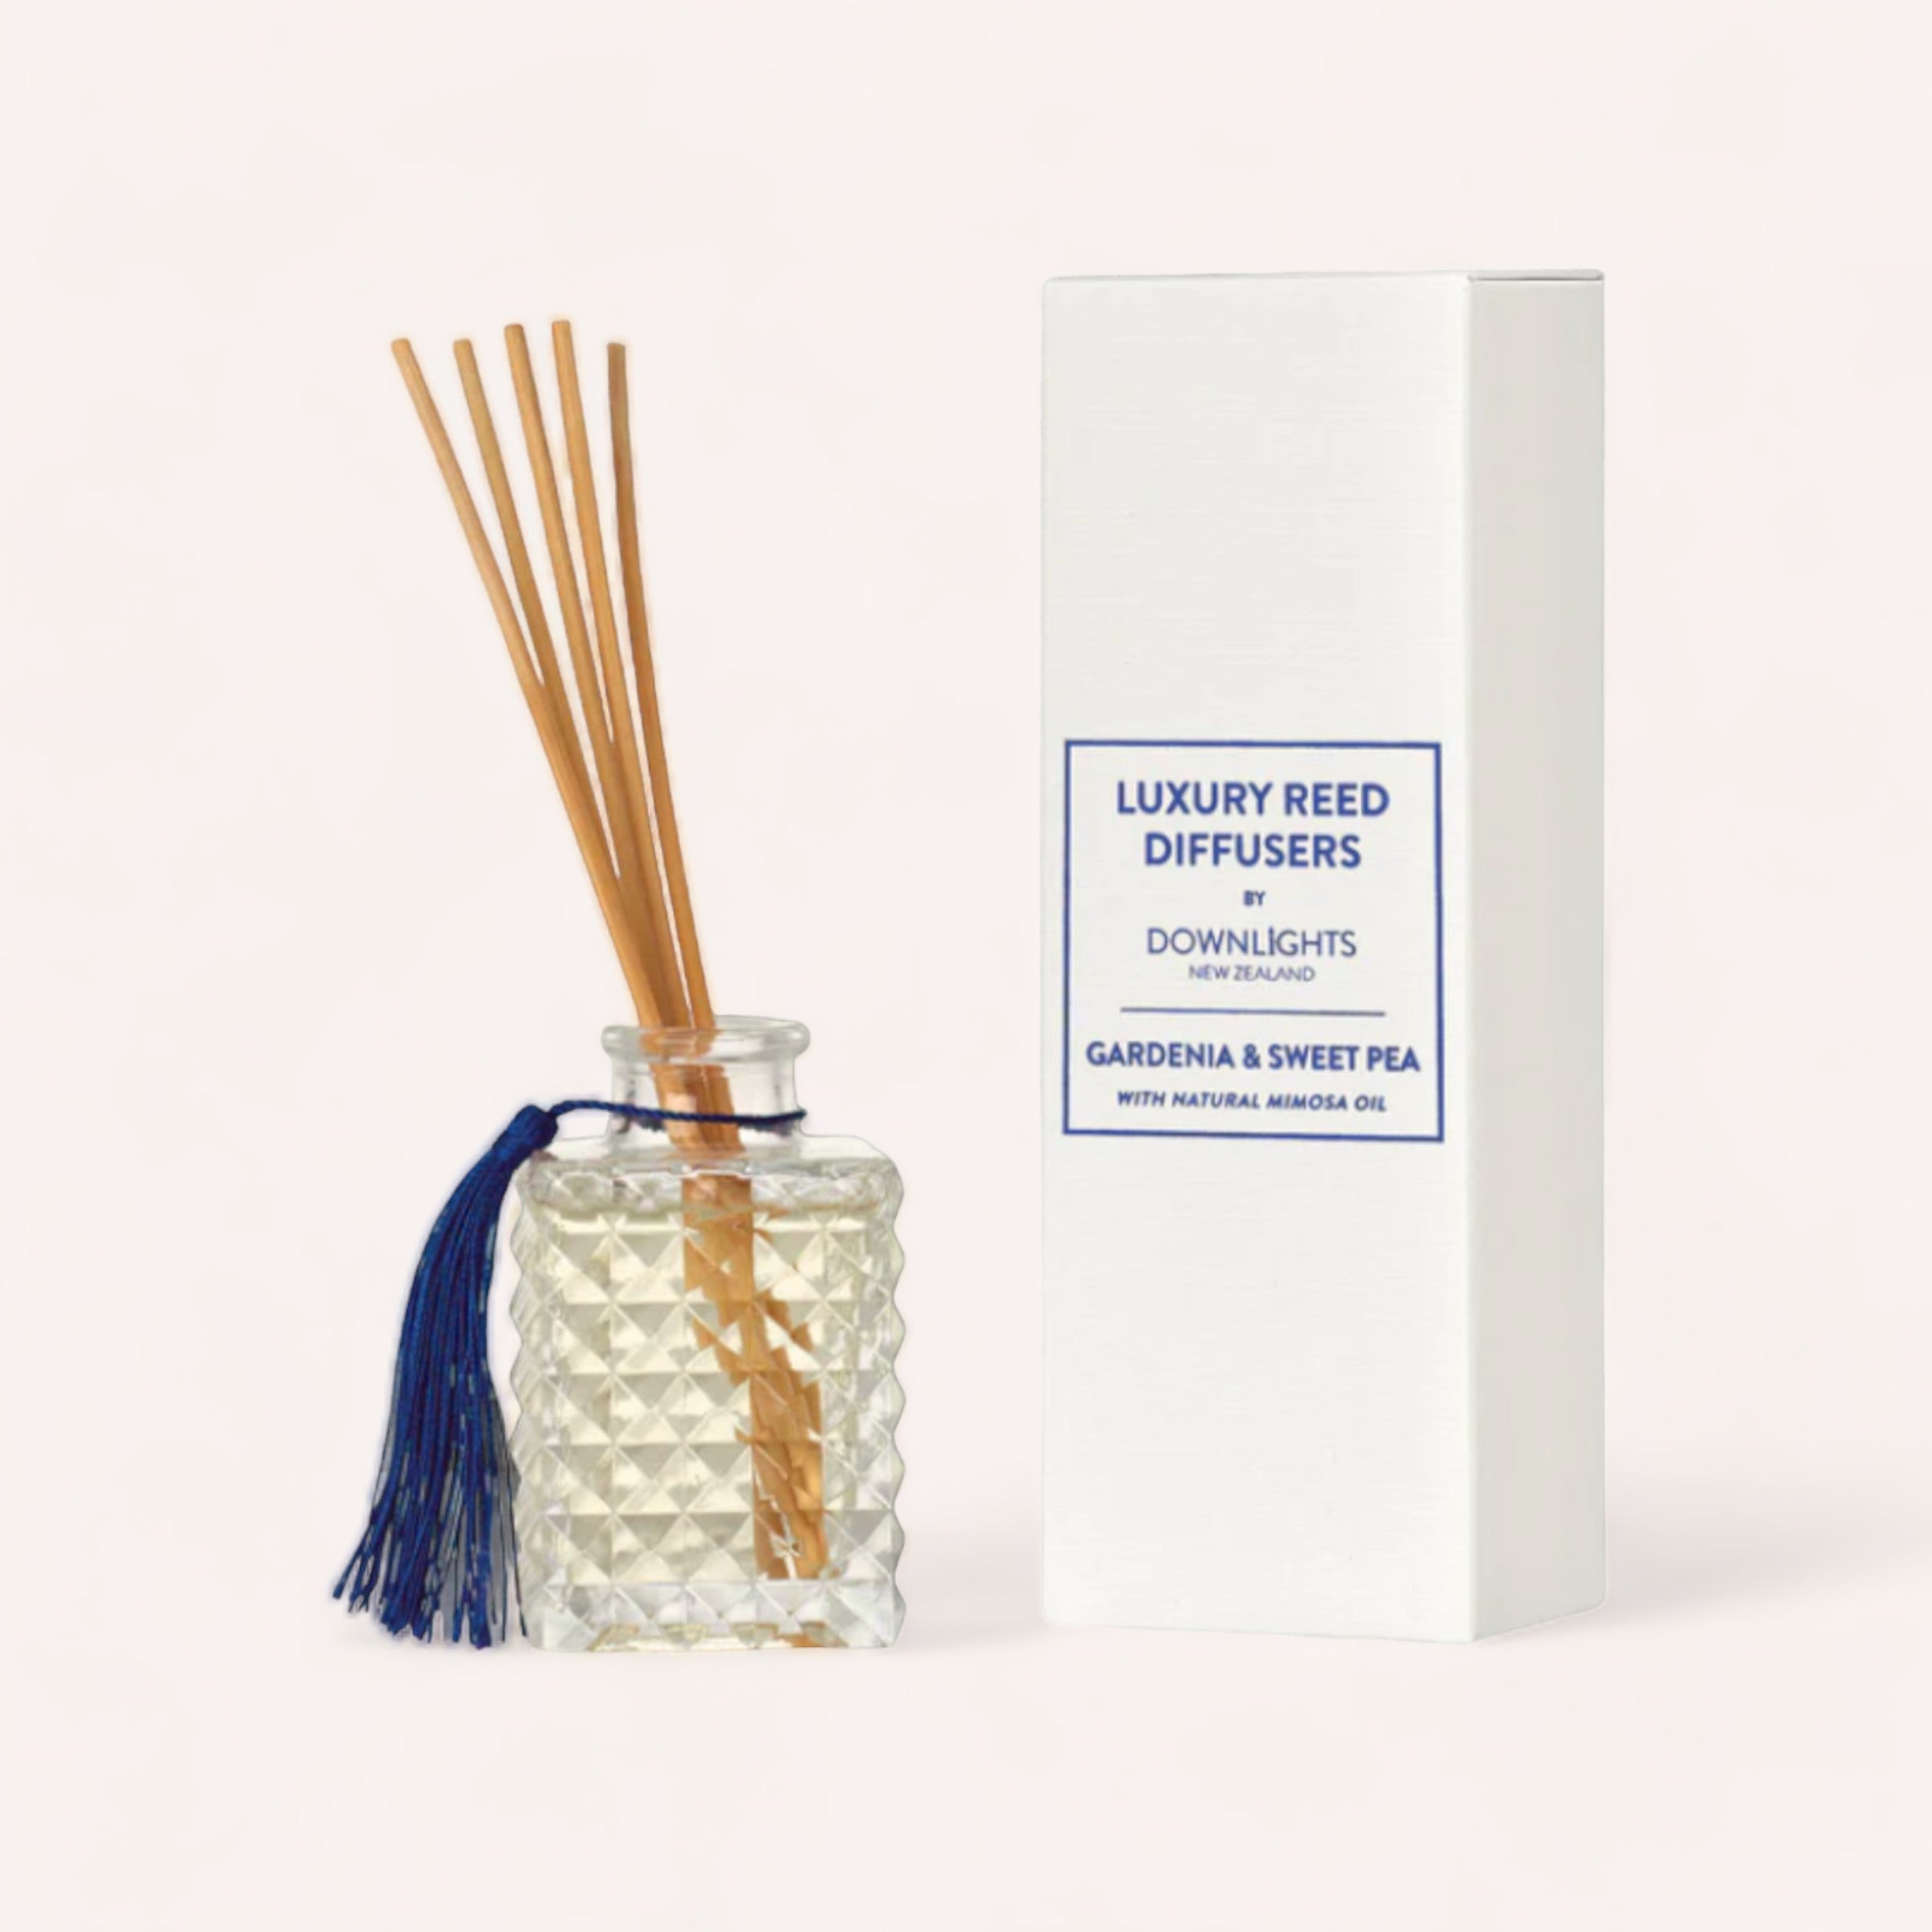 A luxury reed diffuser from Downlights, the Gardenia & Sweet Pea Diffuser with a geometric patterned glass container, featuring reeds inserted for fragrance dispersion, accompanied by a sleek white box labeled with "gardenia & sweet pea".